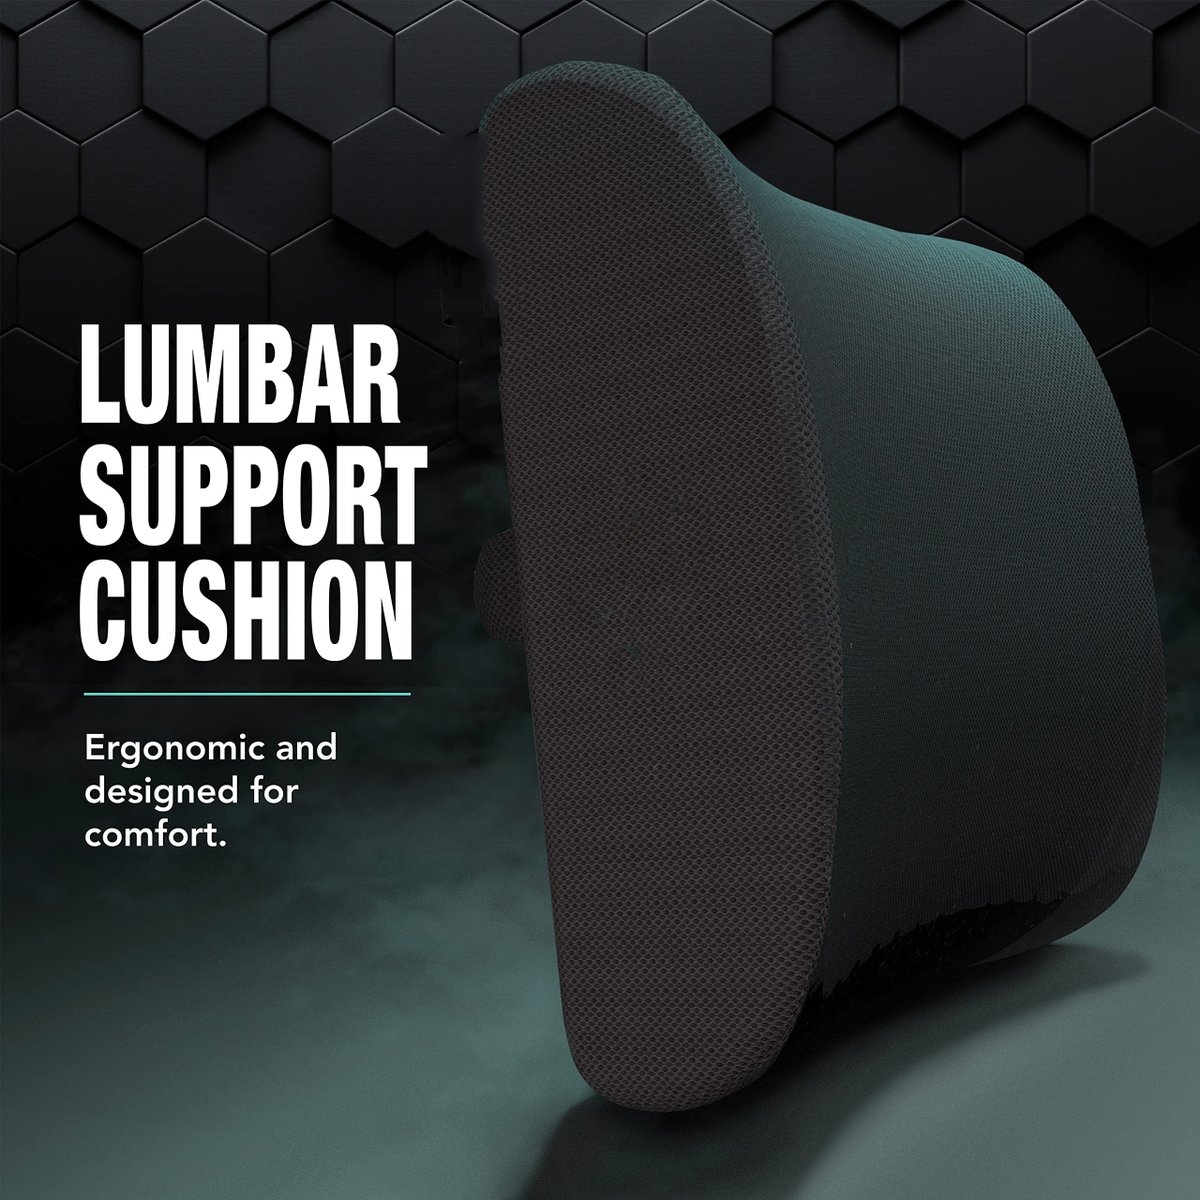 Relieve back pain and improve your posture with the Lumbar Back Support Pillow! 😍🙌 Perfect for office chairs, car seats, and travel. Get yours today! 
amzn.to/3KLuB1M
#backpainrelief #lumbarpillow #HashtPillow #posturecorrection #spinalalignment